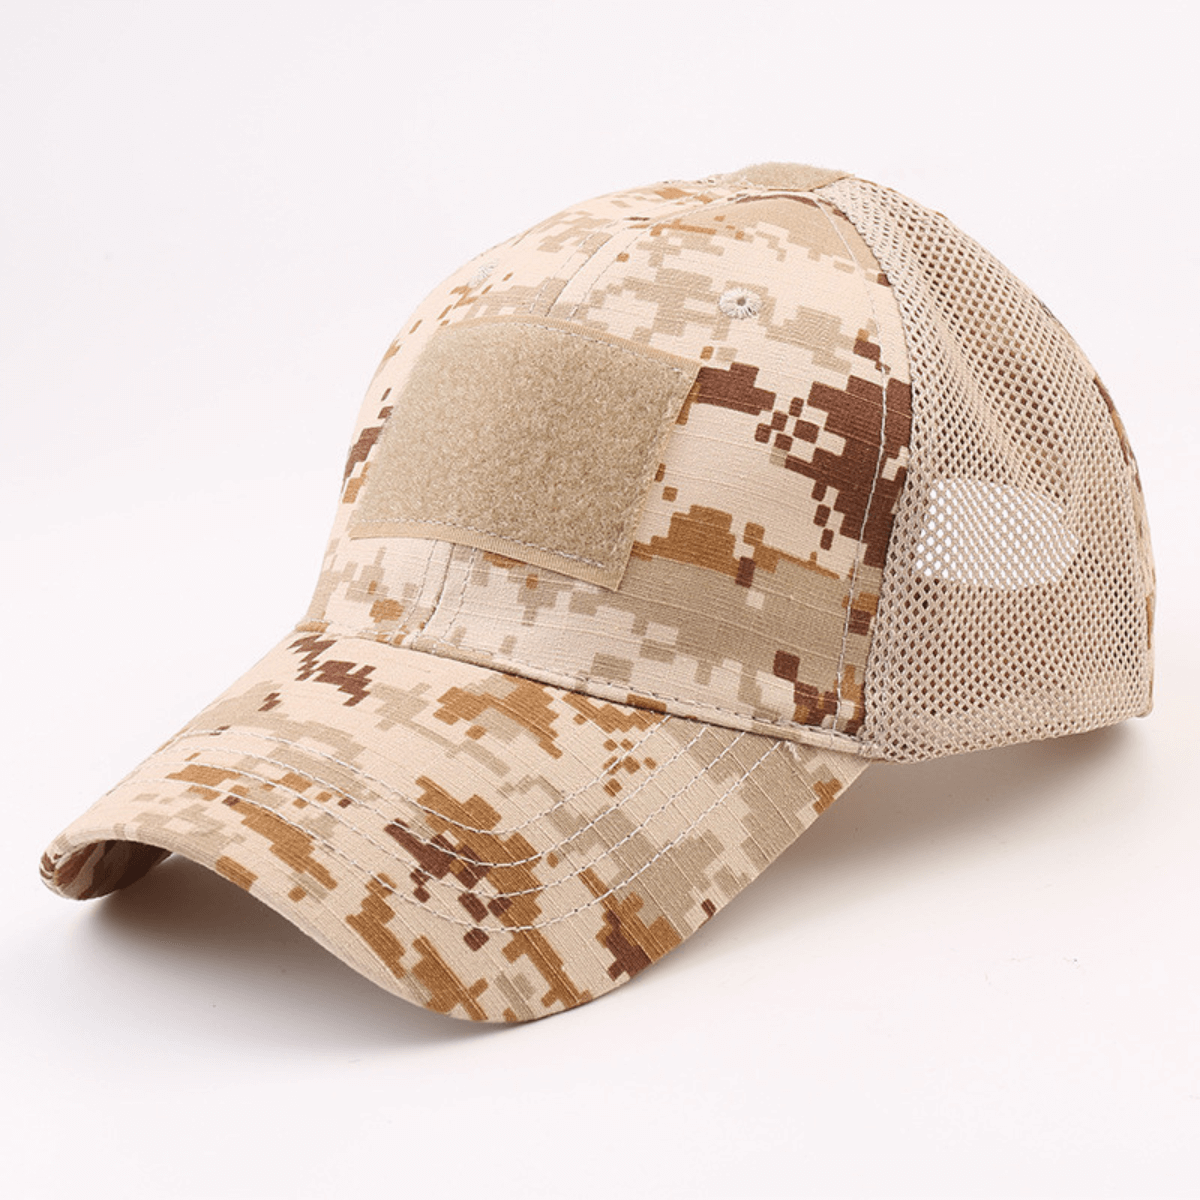 Military-Style Tactical Patch Hat Urbanheer – with Strap Adjustable